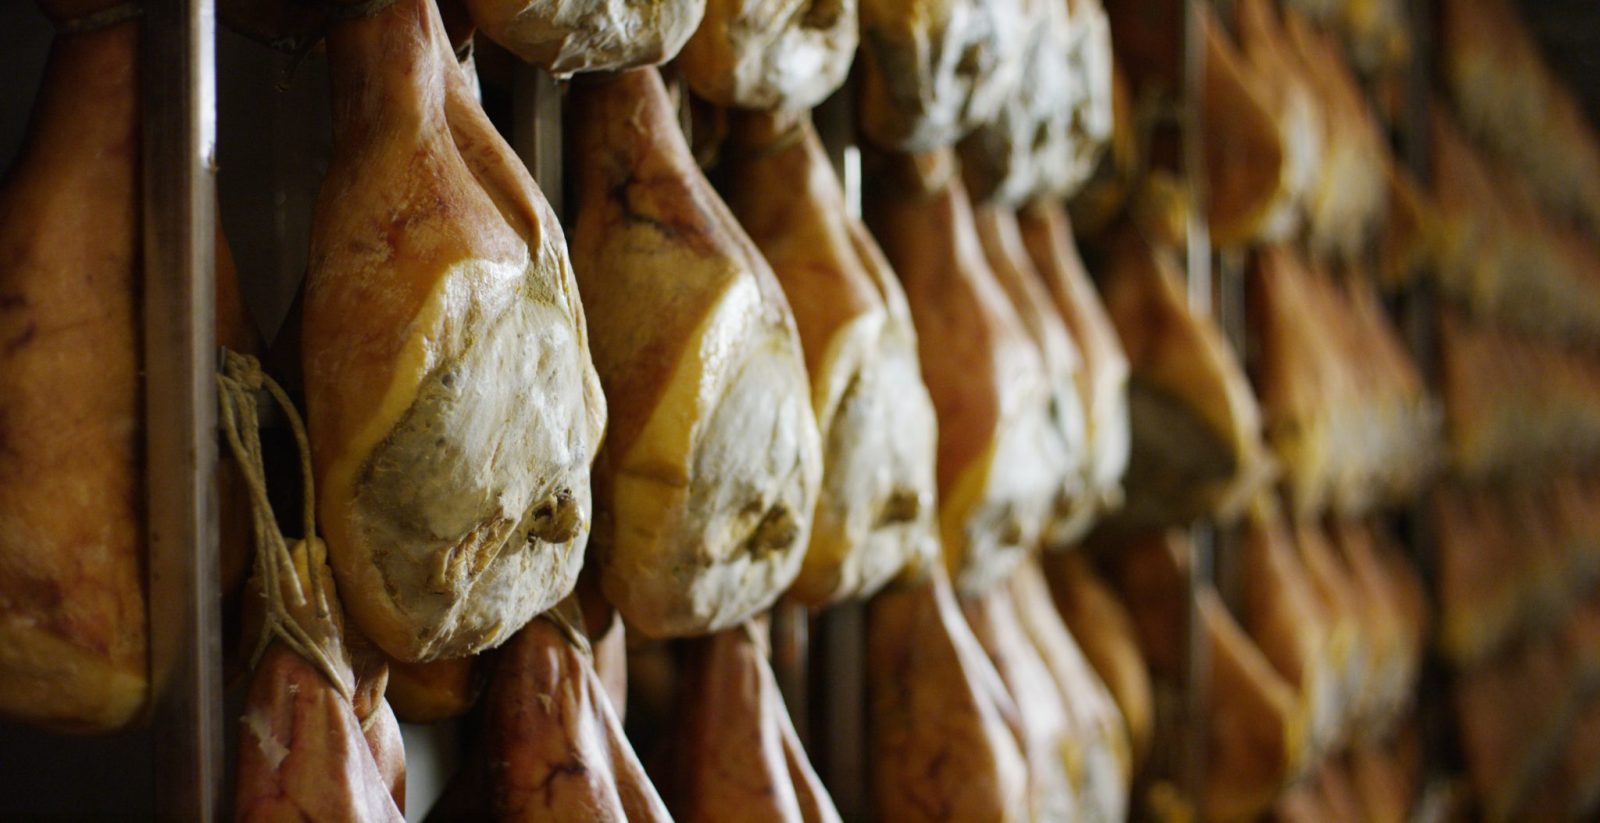 Parma,Ham,Professional,And,Traditional,Of,The,History,And,Culture